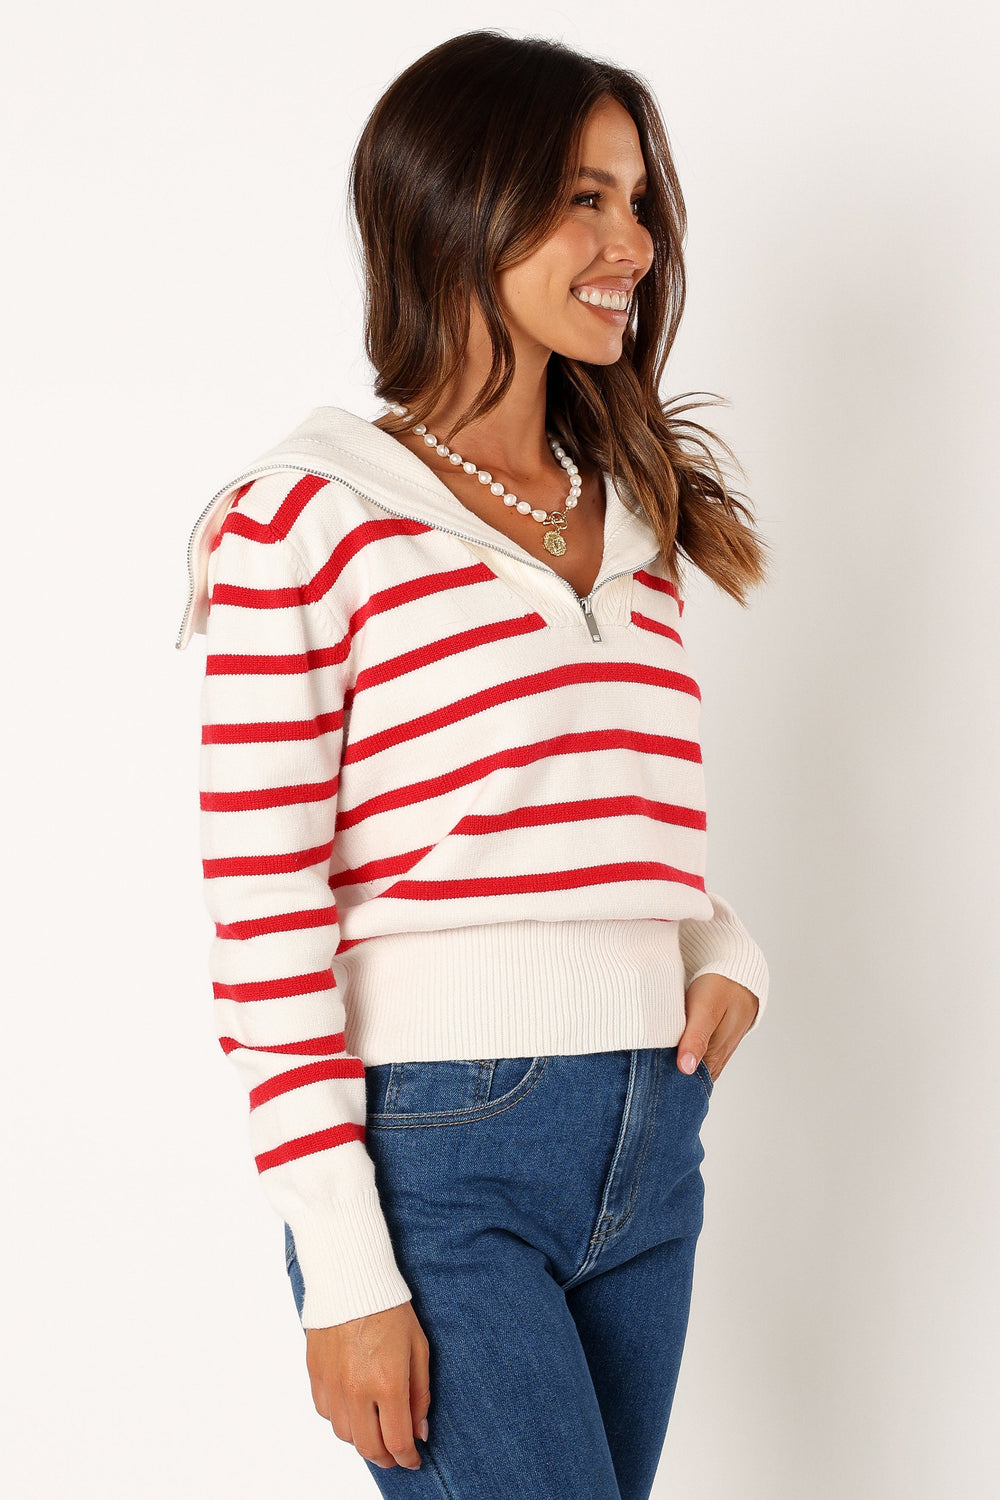 Guinevere Striped Quarter Zip - White Red - Petal & Pup USA